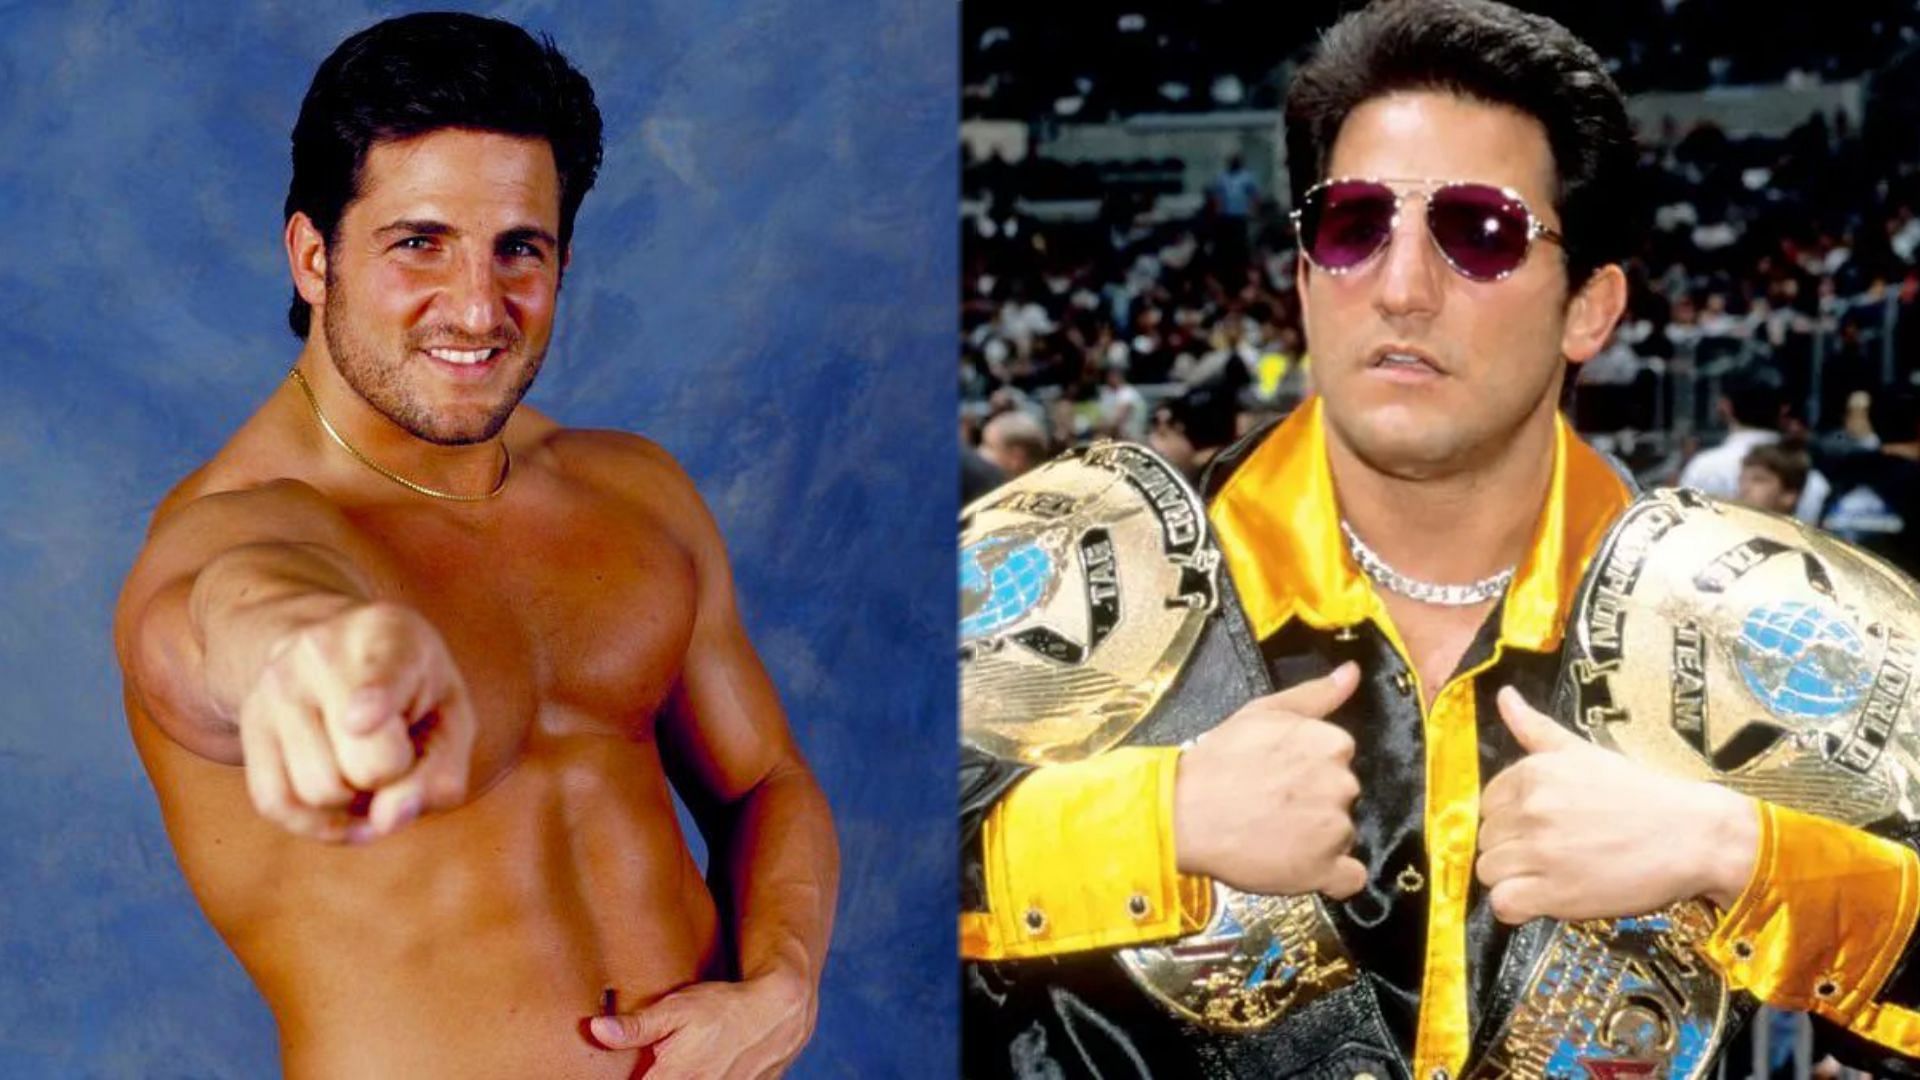 Disco Inferno has never shied away from voicing his criticisms about AEW and pro wrestling.